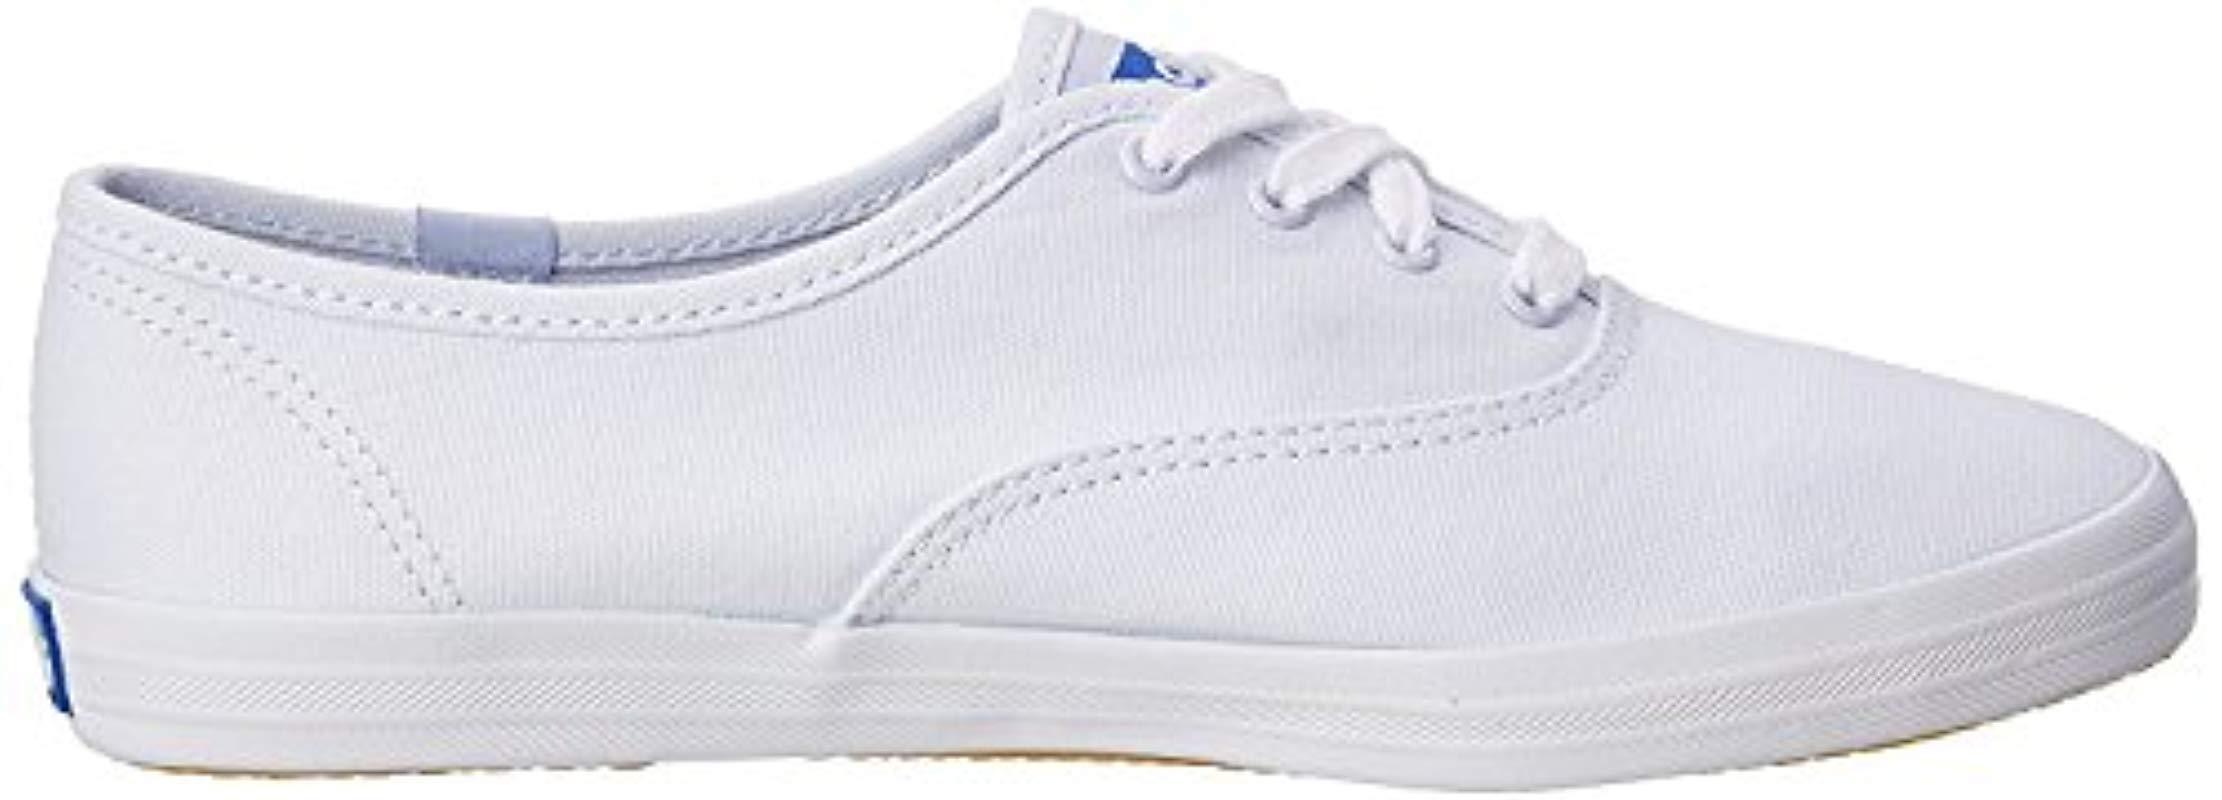 Keds Champion Original Leather Lace-up Sneaker, White Leather, 7.5 S Us ...